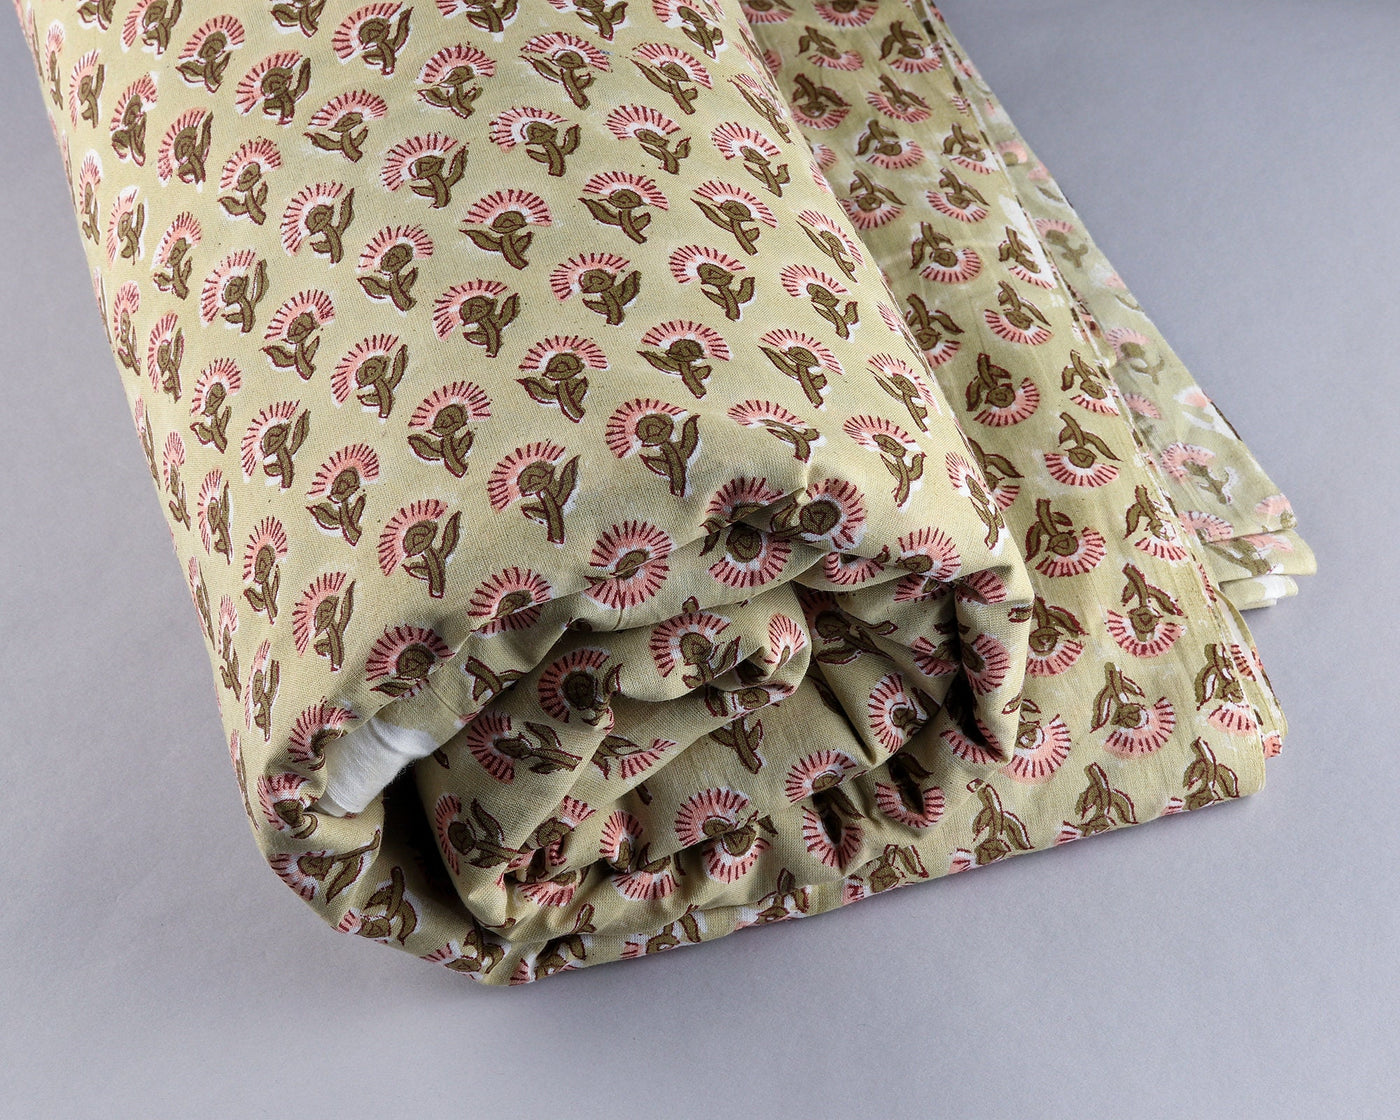 Light Moss Green, Coral Pink Indian Floral Hand Block Printed 100% Pure Cotton cloth, Fabric by the yard, Women's Clothing Curtains Pillows